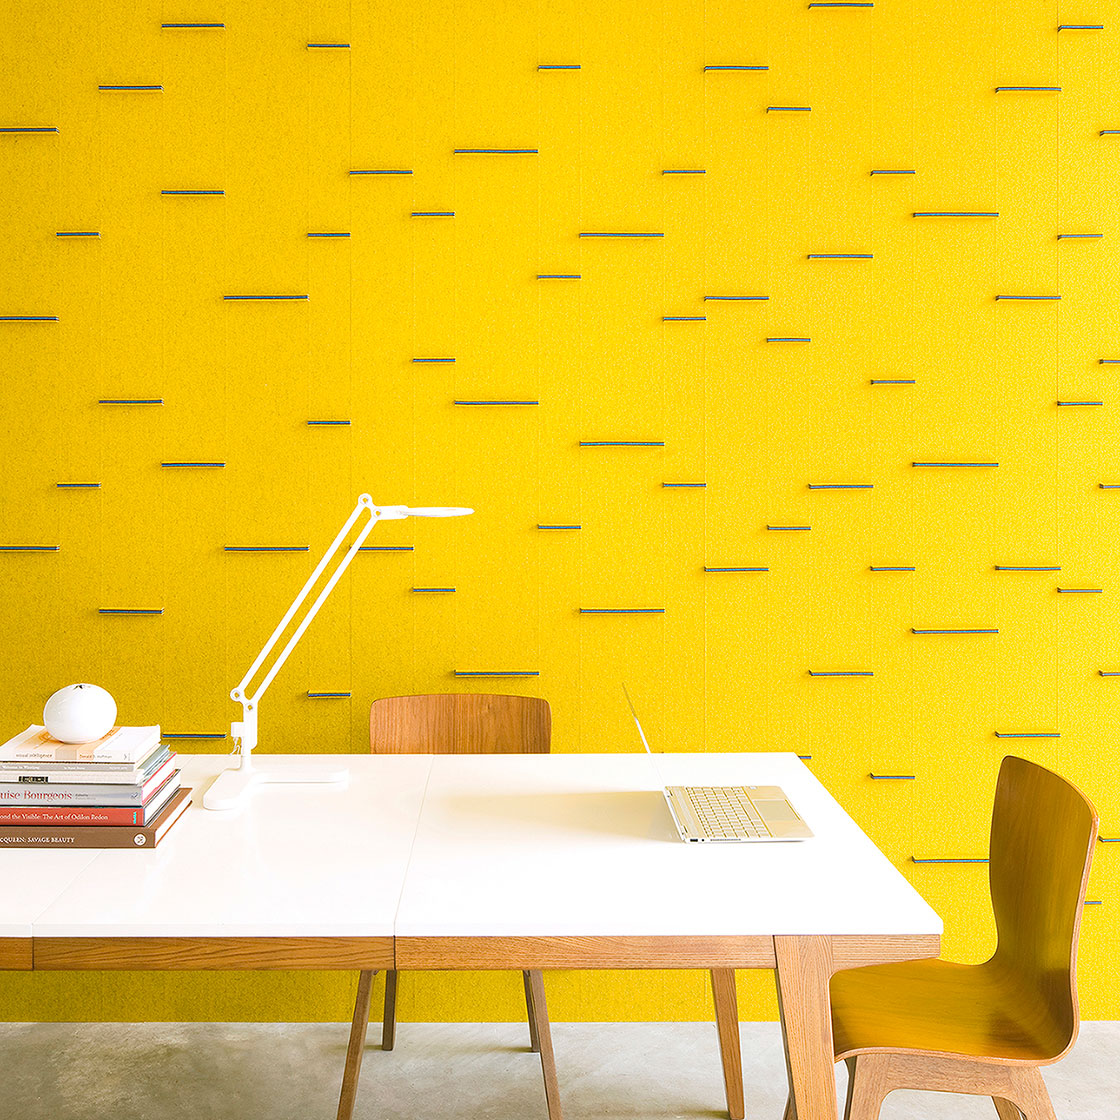 A room scene with a table used as a desk in front of a bright yellow wool felt wall with blue horizontal tabs in various legnths